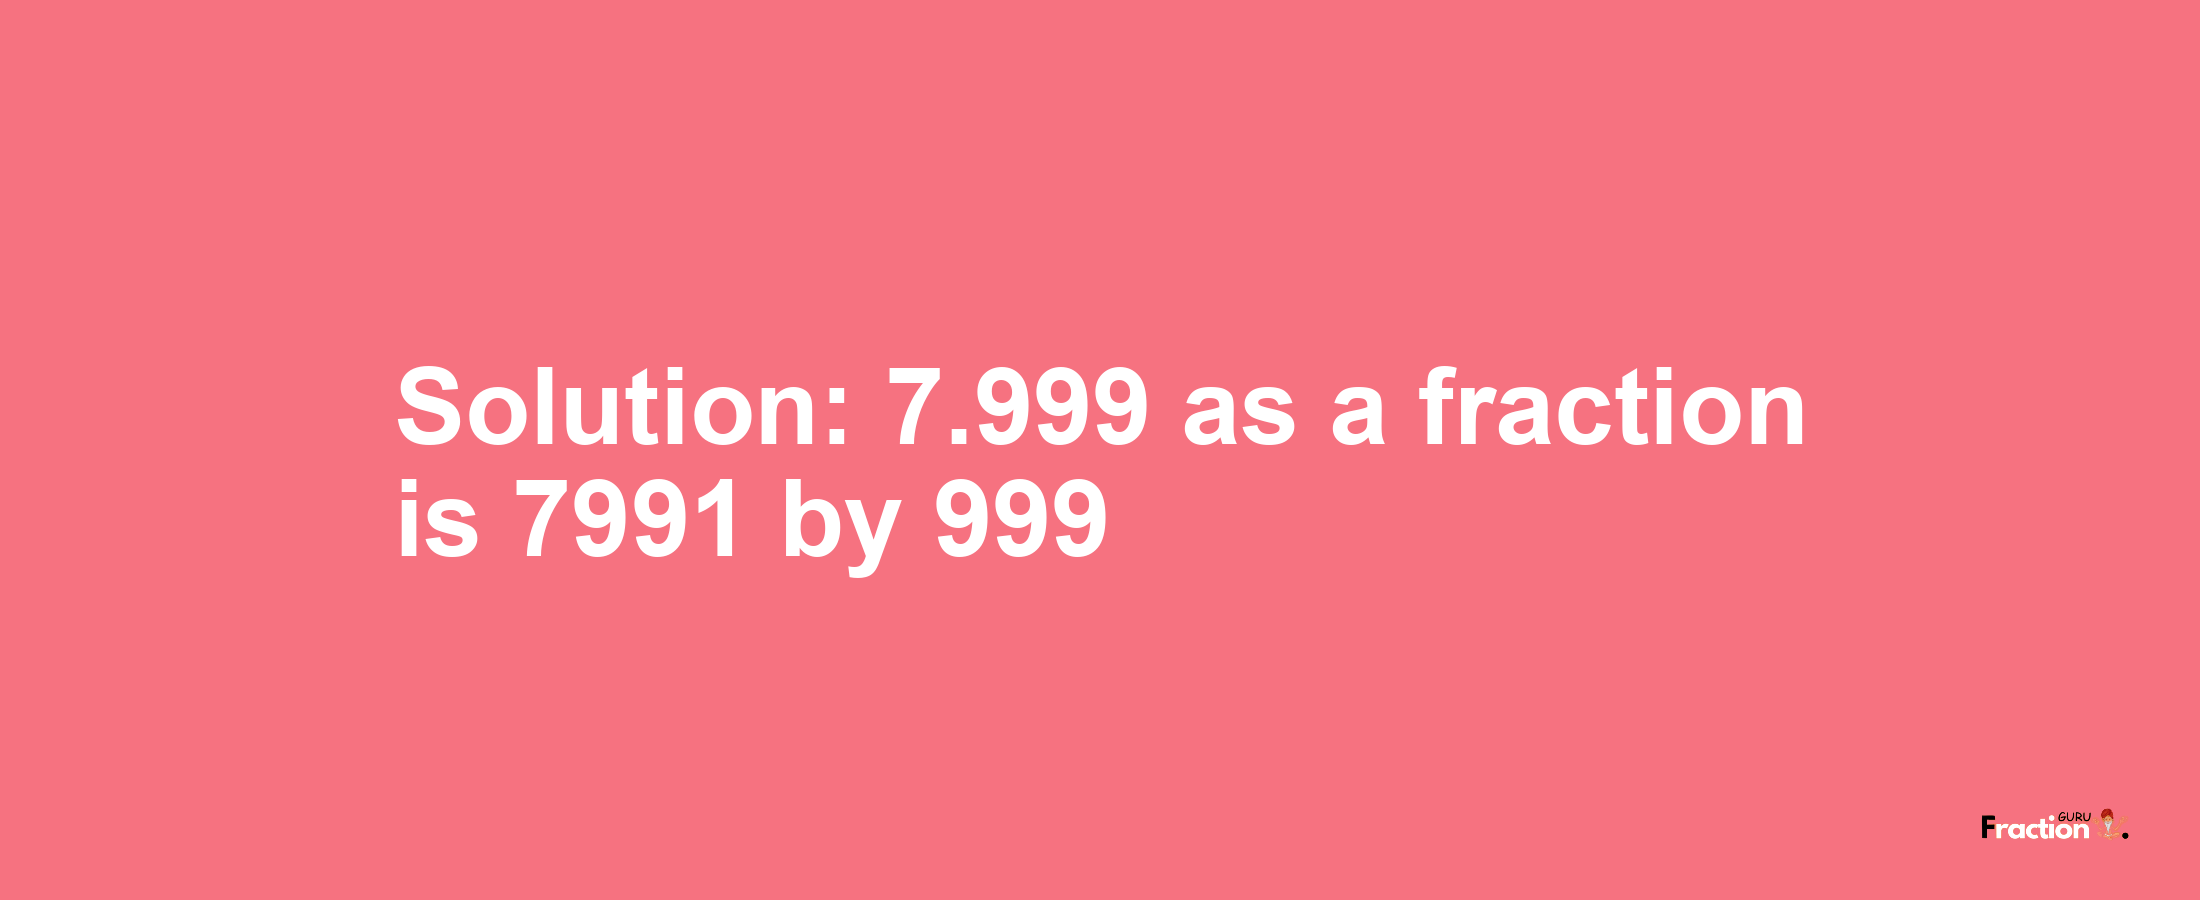 Solution:7.999 as a fraction is 7991/999